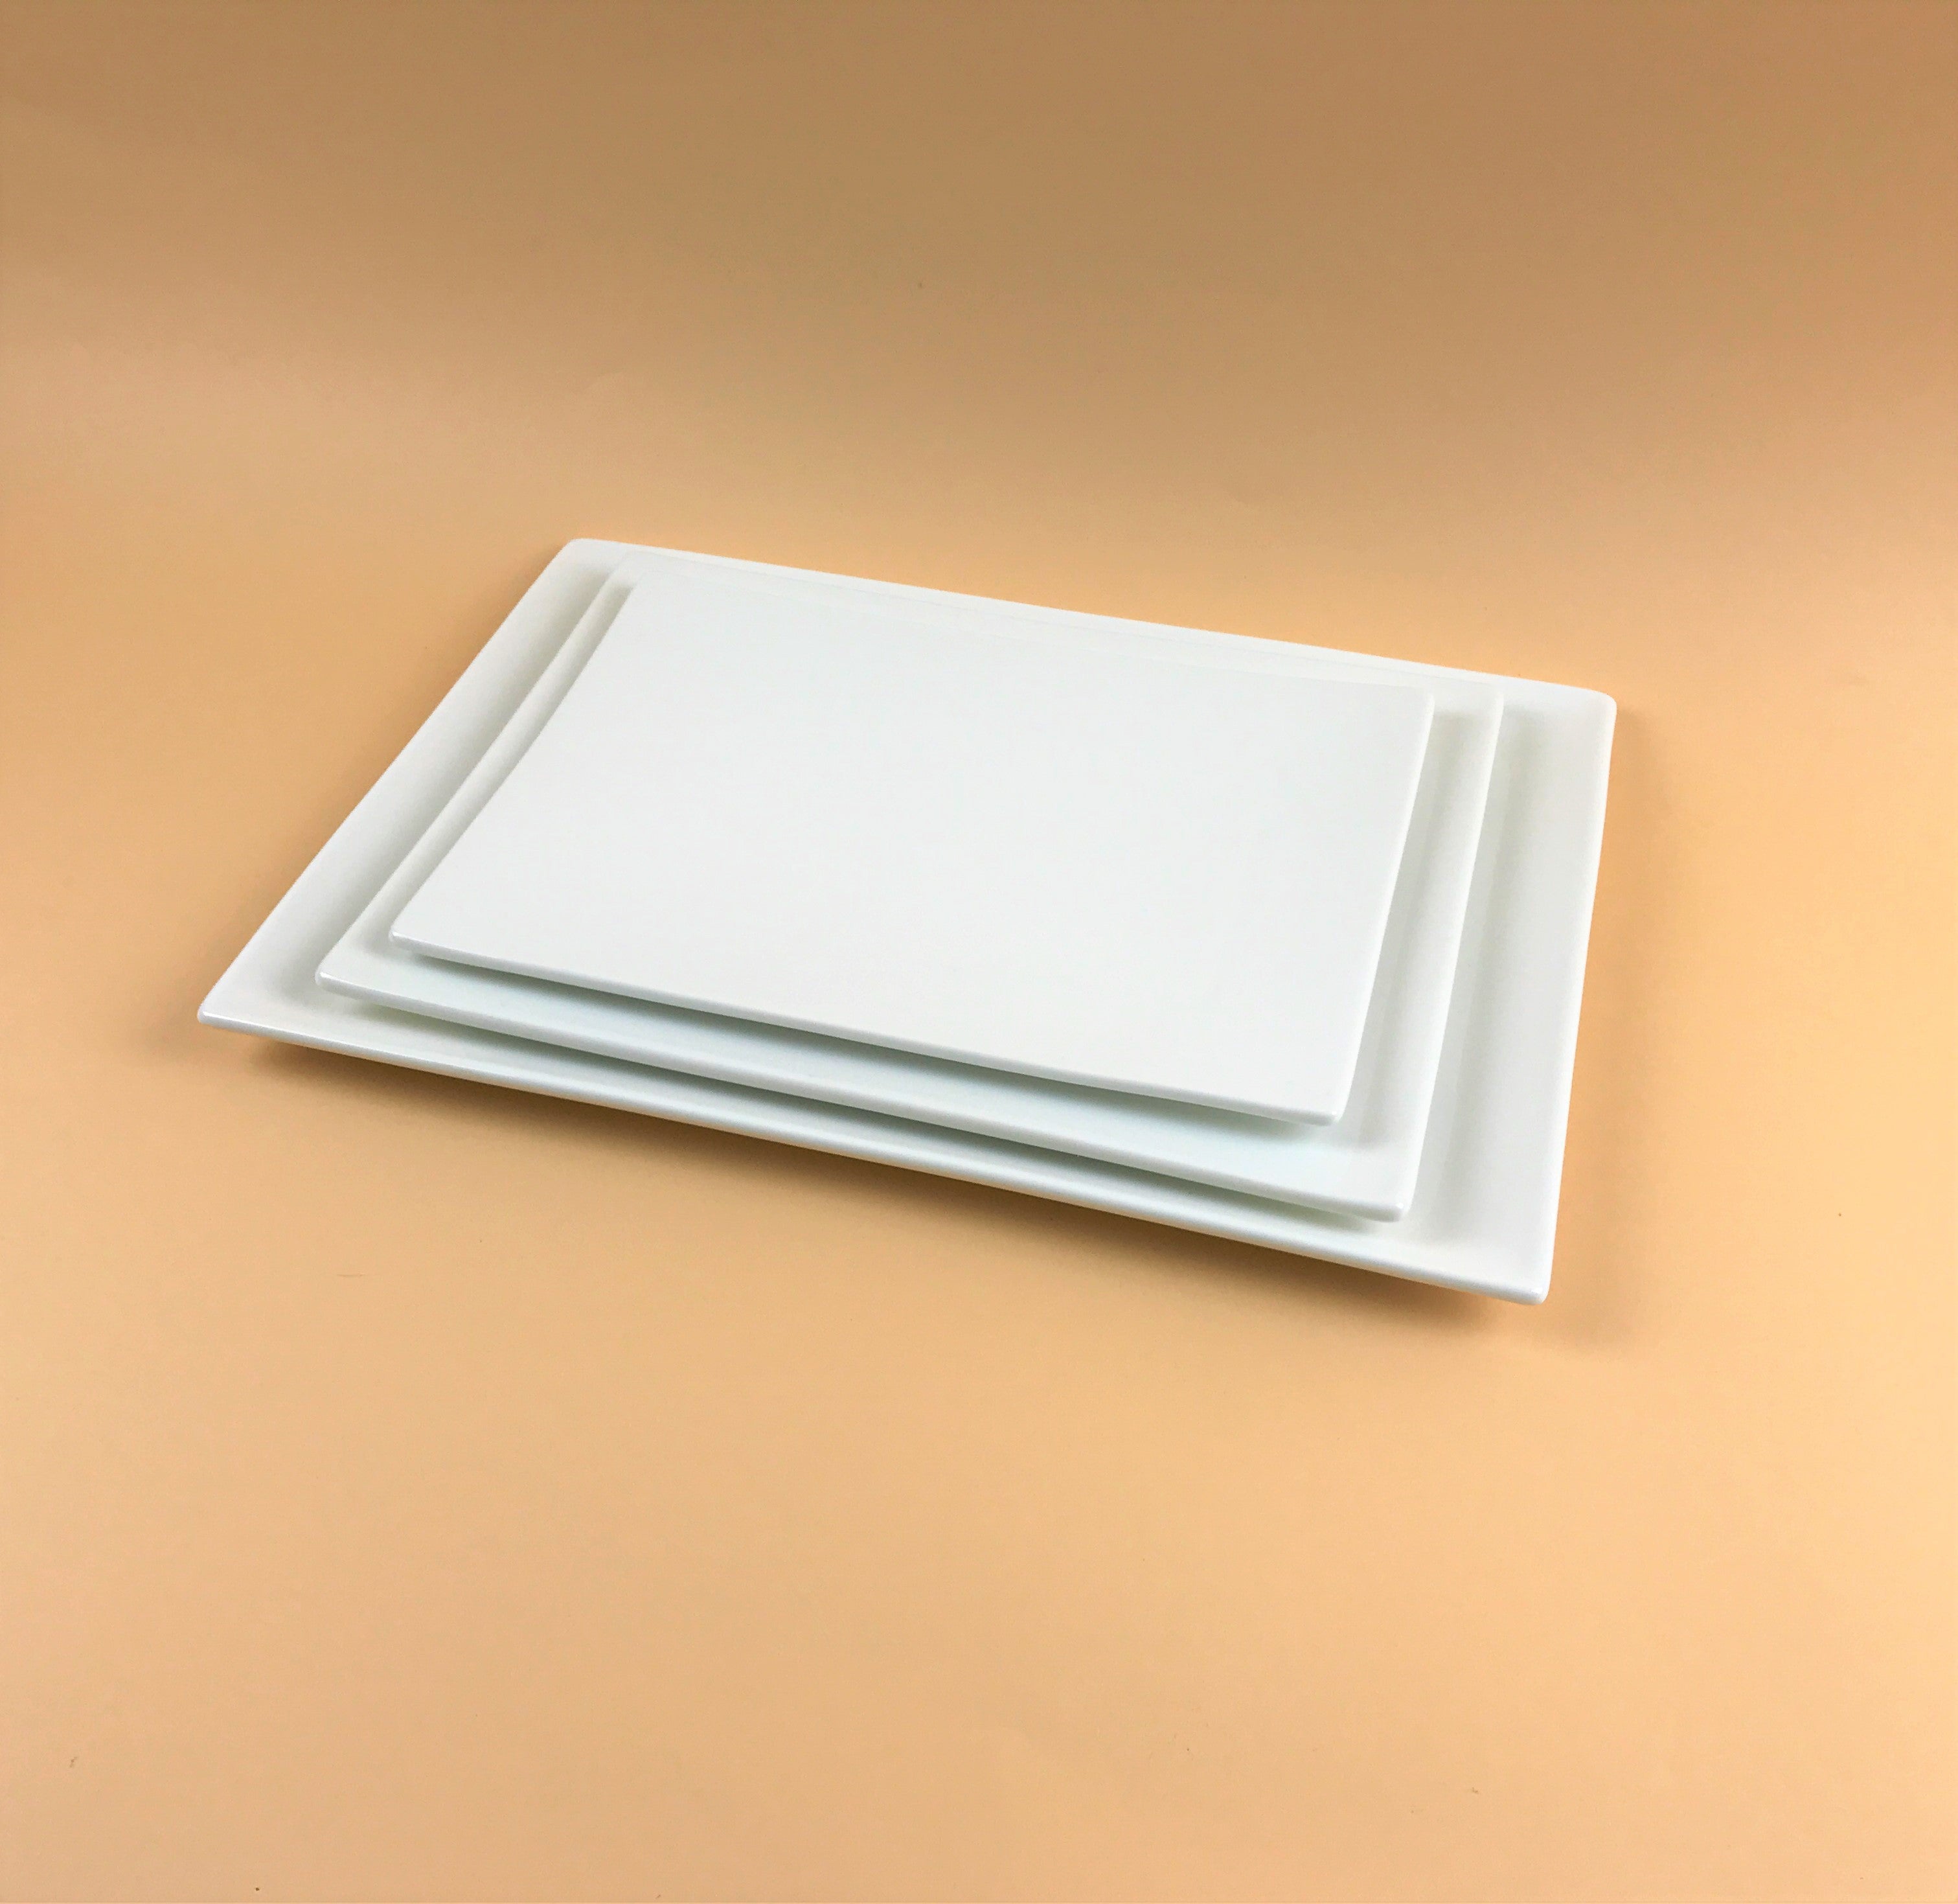 Grove Rectangle Plates in 4 sizes, 10", 11 1/2", 13 3/4", and 15 3/4"